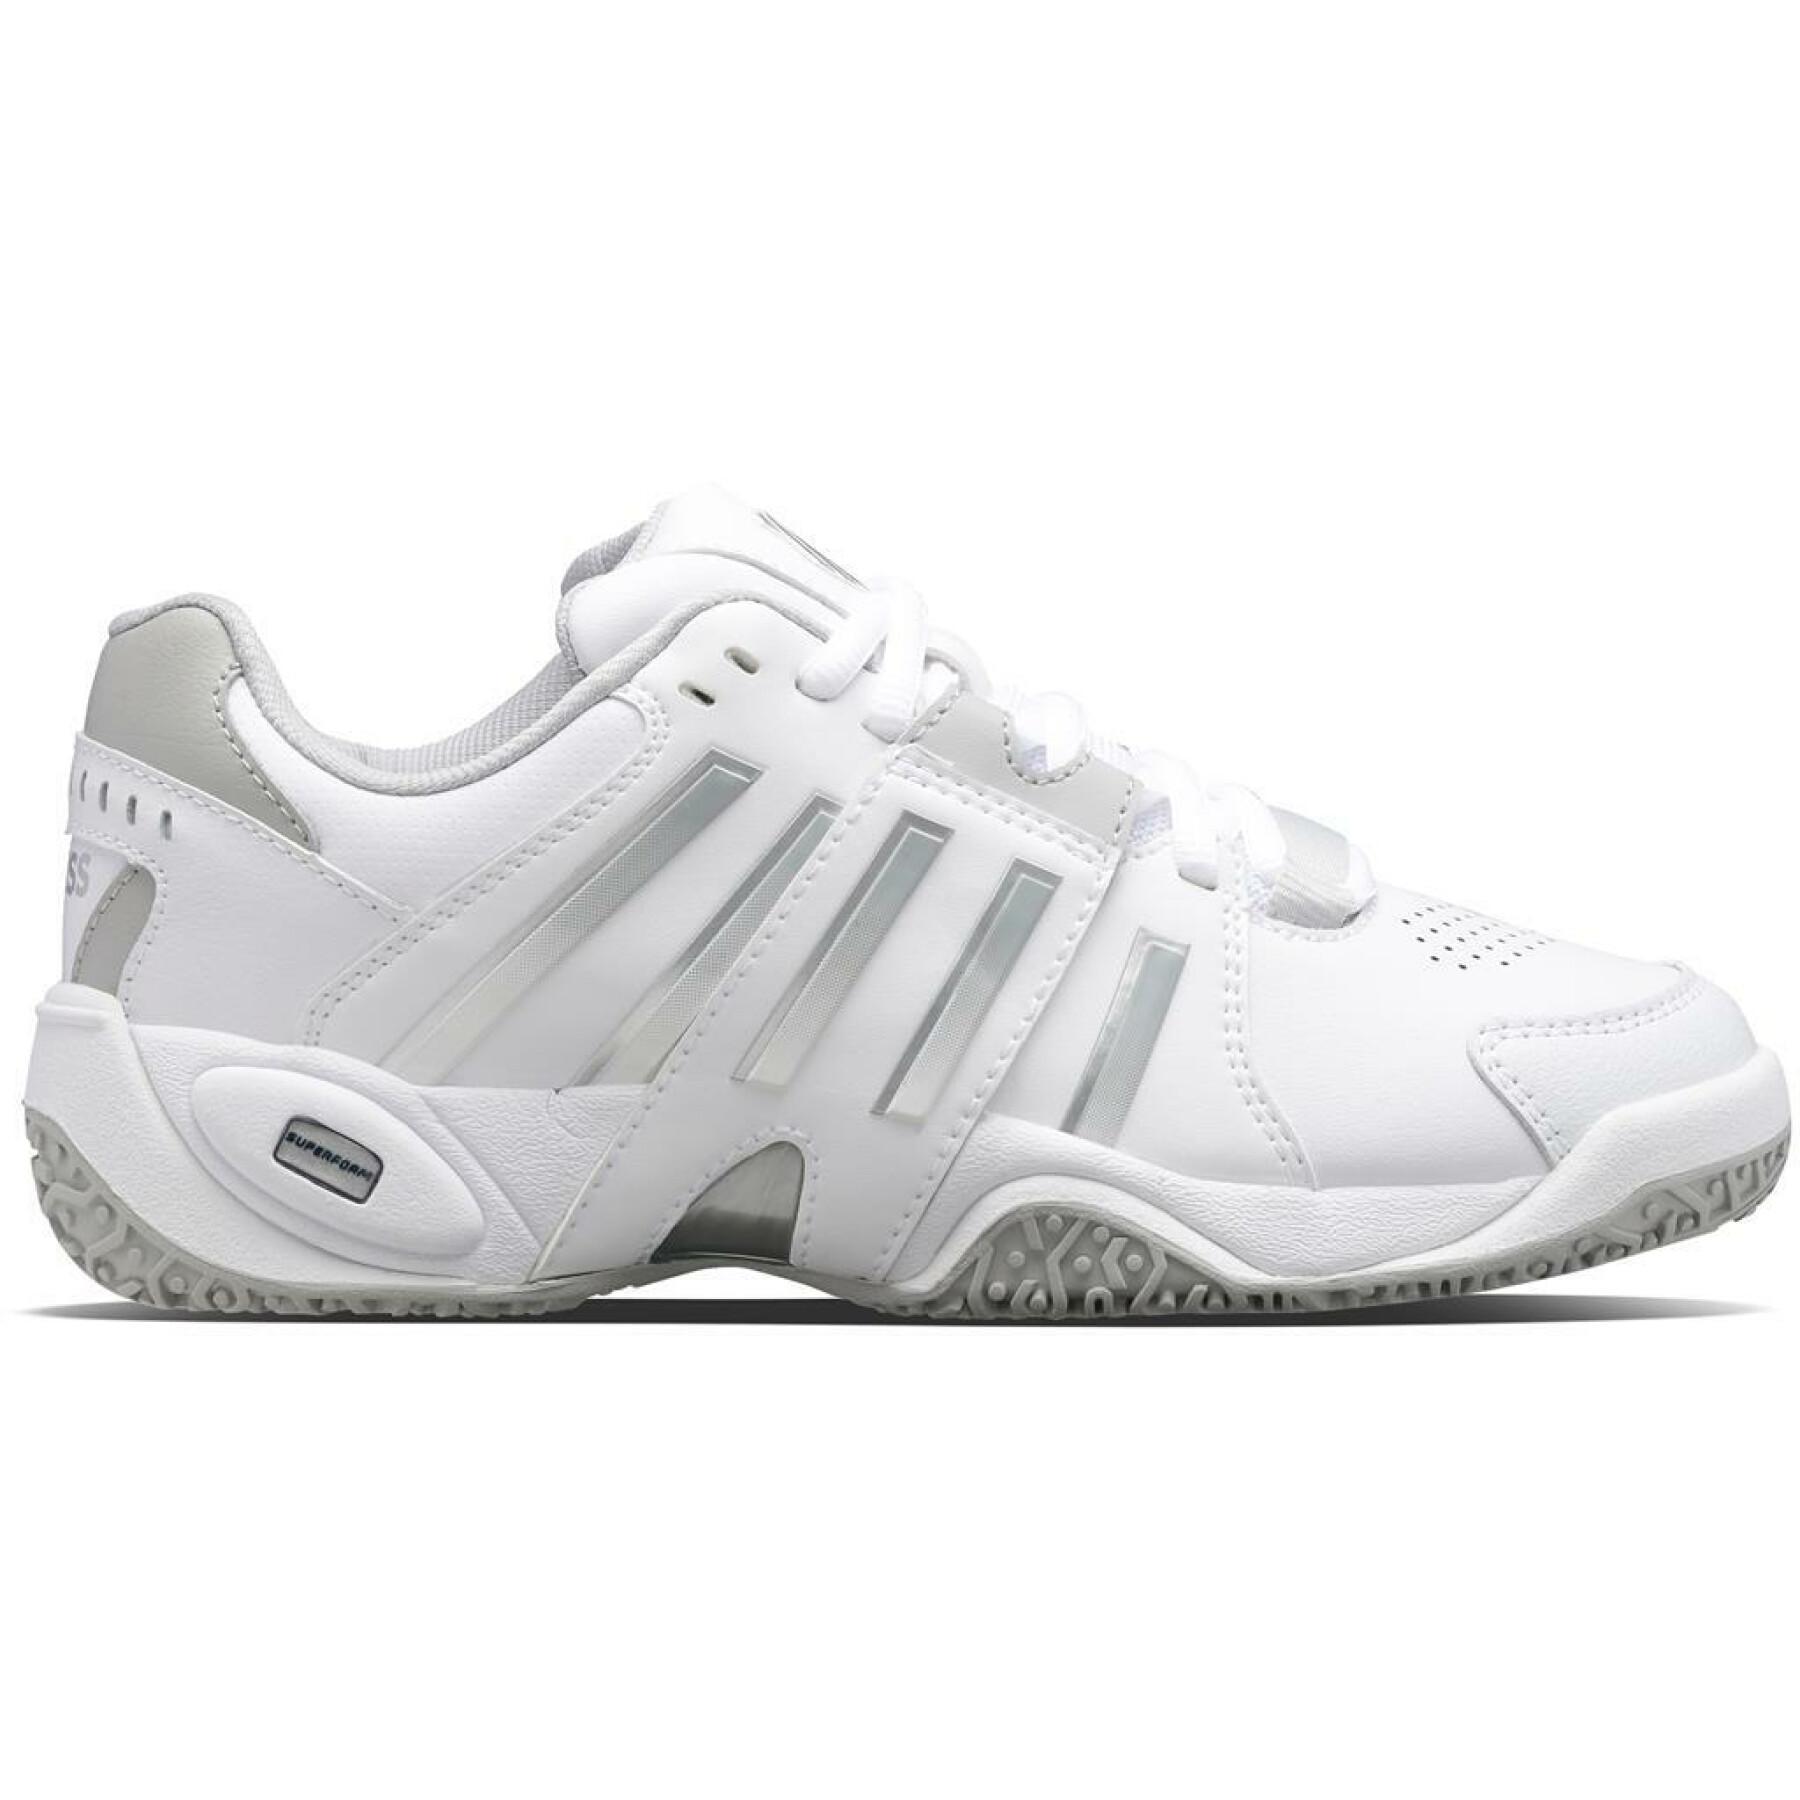 Women's shoes K-Swiss IV Omni - K-Swiss Other Brands - Shoes